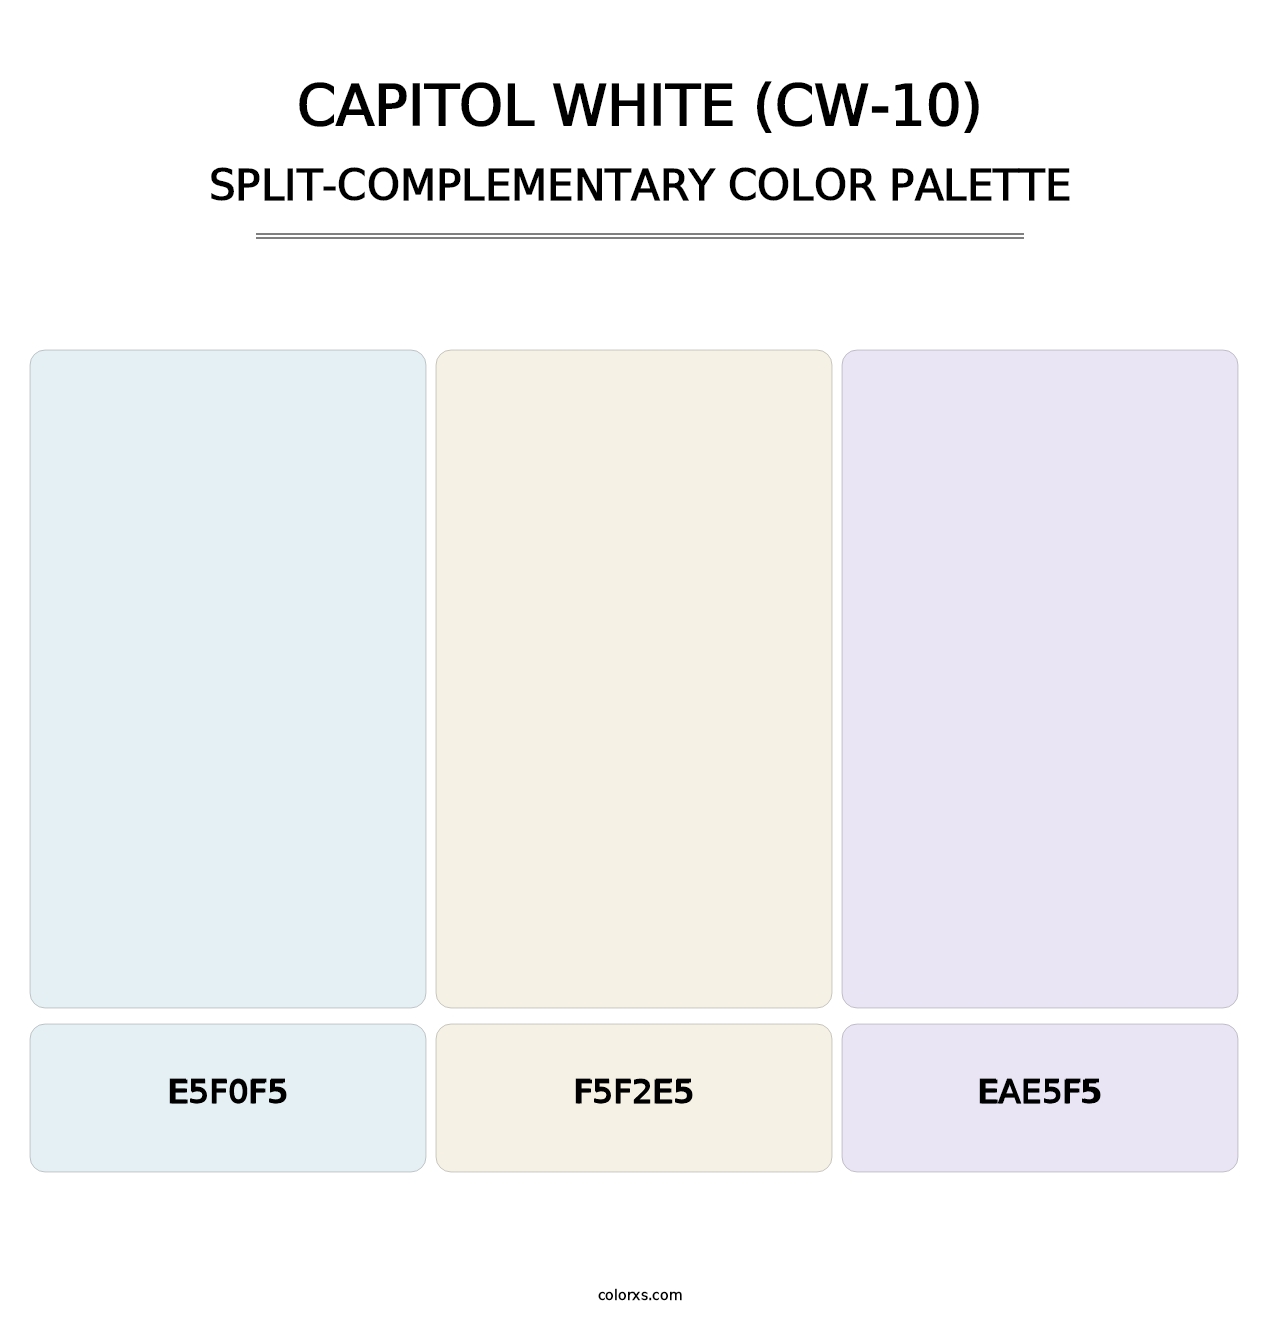 Capitol White (CW-10) - Split-Complementary Color Palette